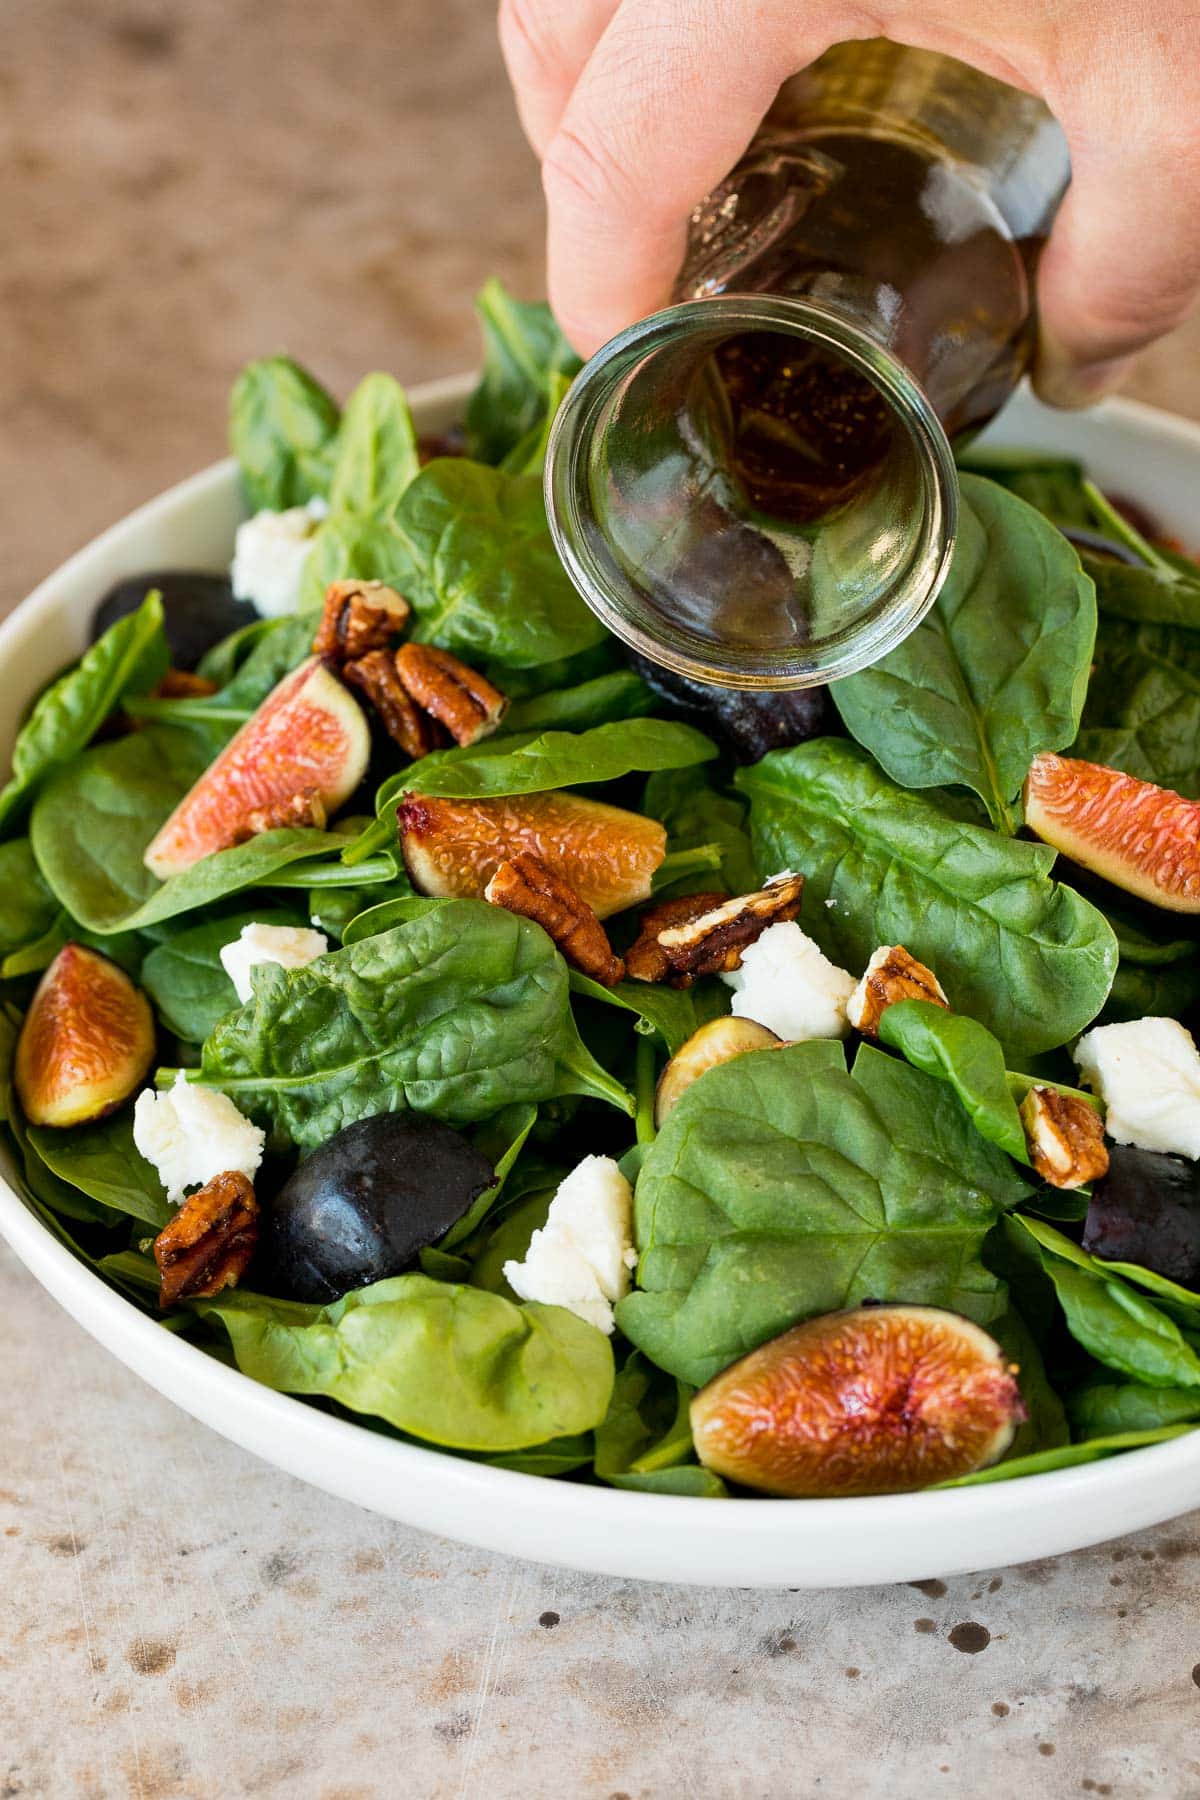 Dressing being poured over spinach salad.